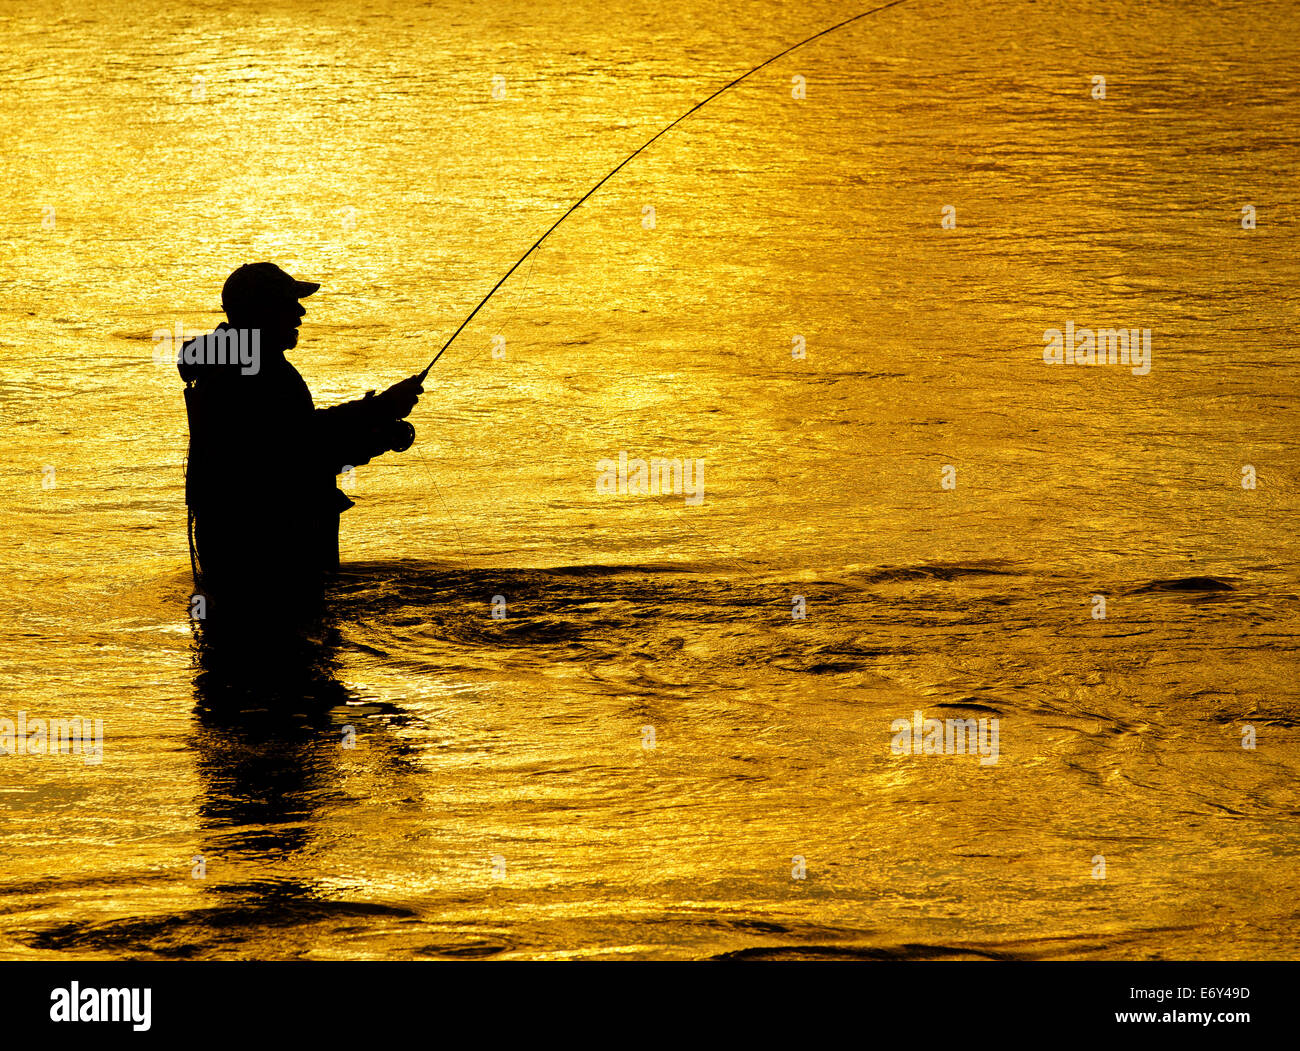 Man fishing in river with fly rod and waders Stock Photo